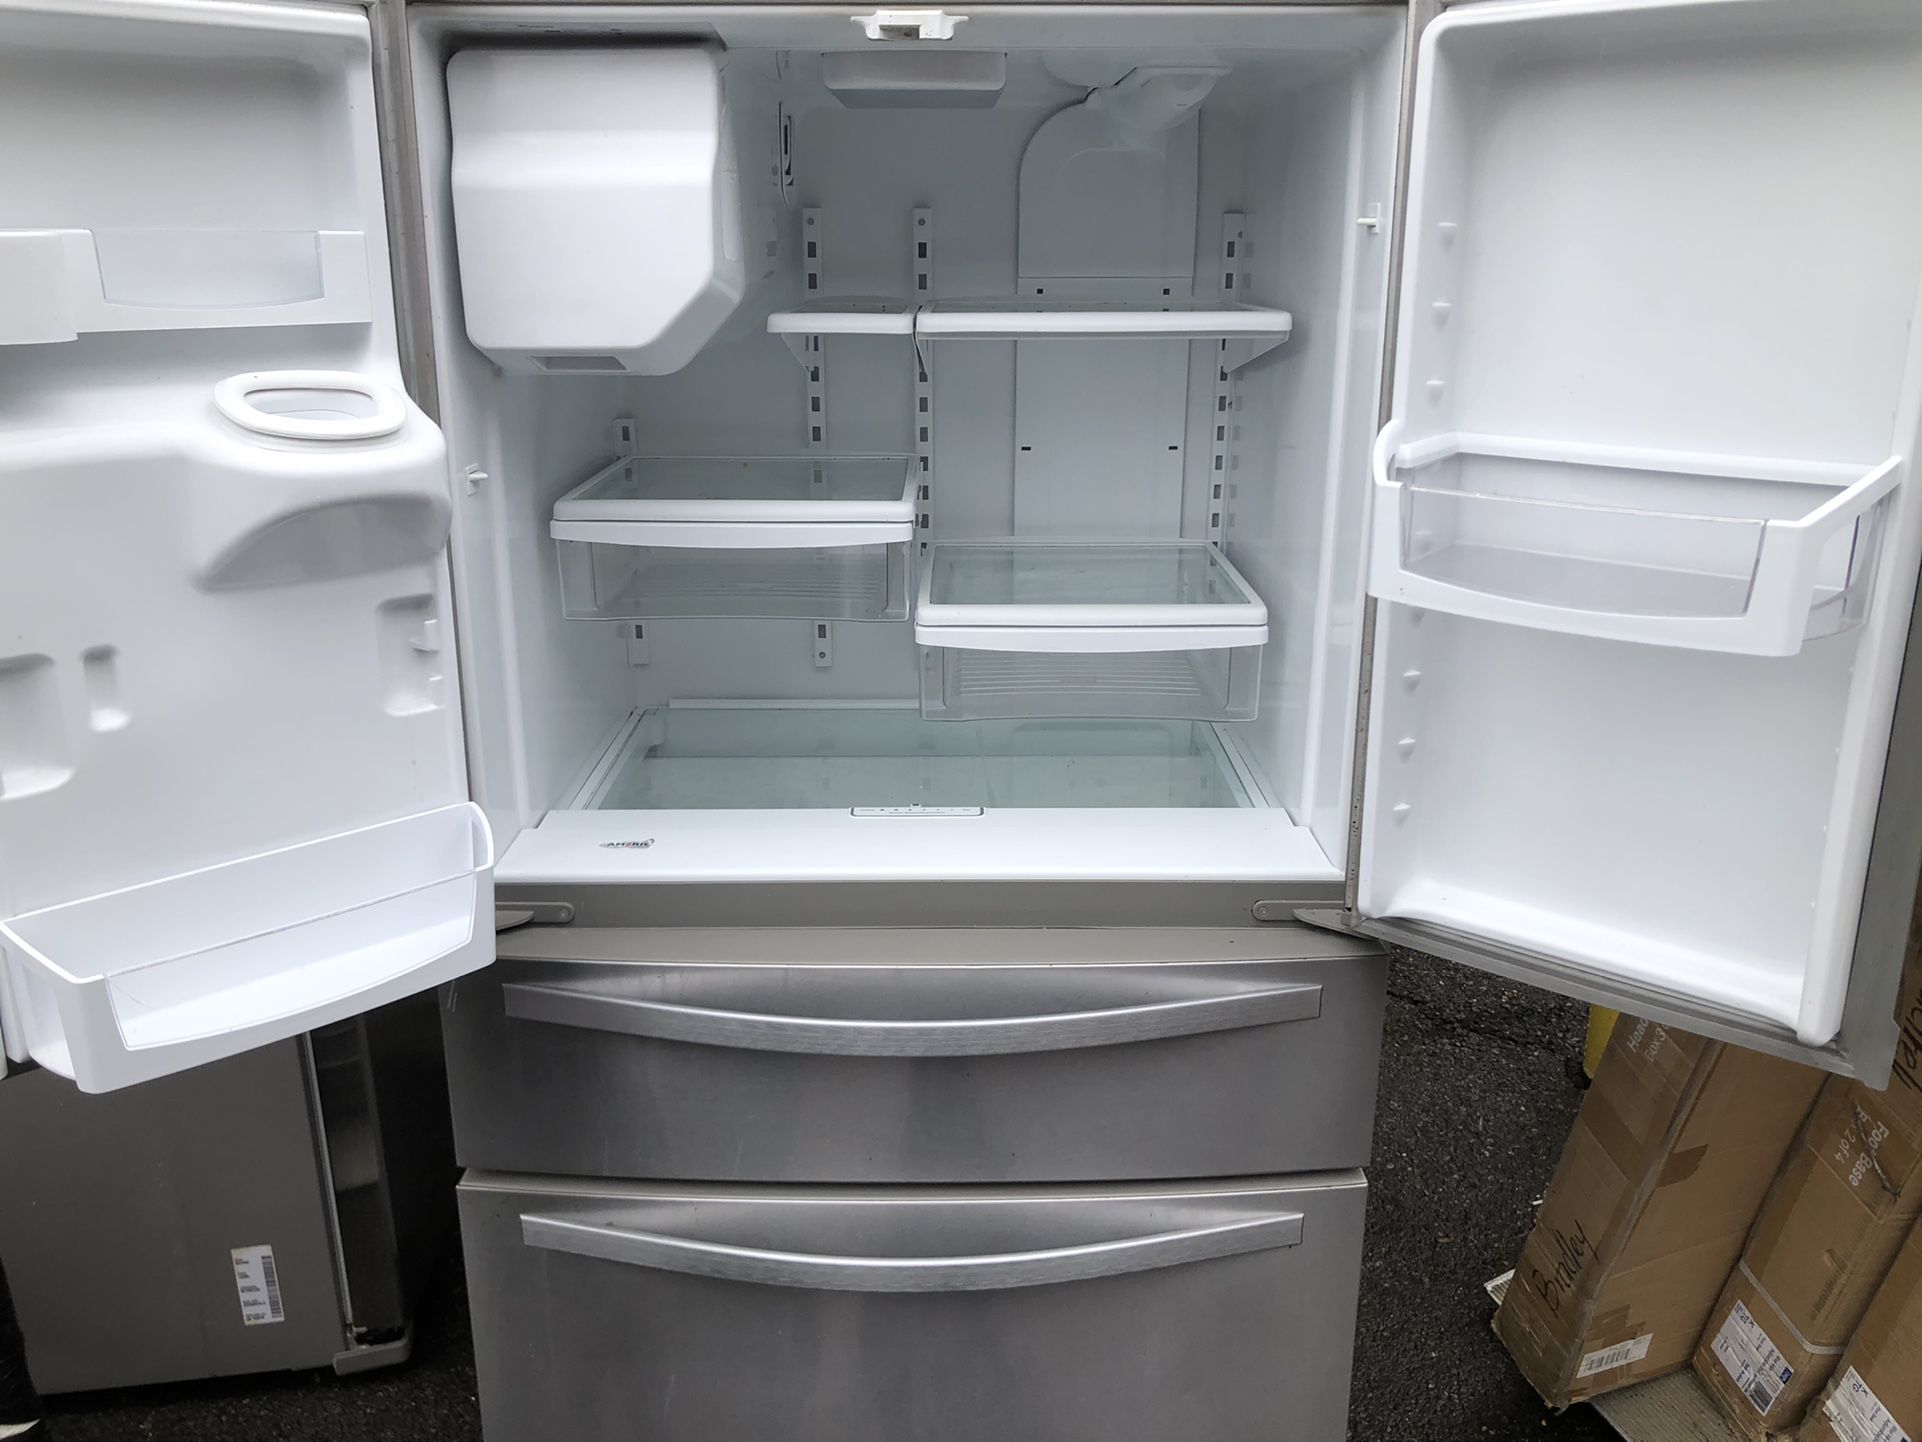 Whirlpool Stainless Steel Frenchdoor Refrigerator DELIVERY!!